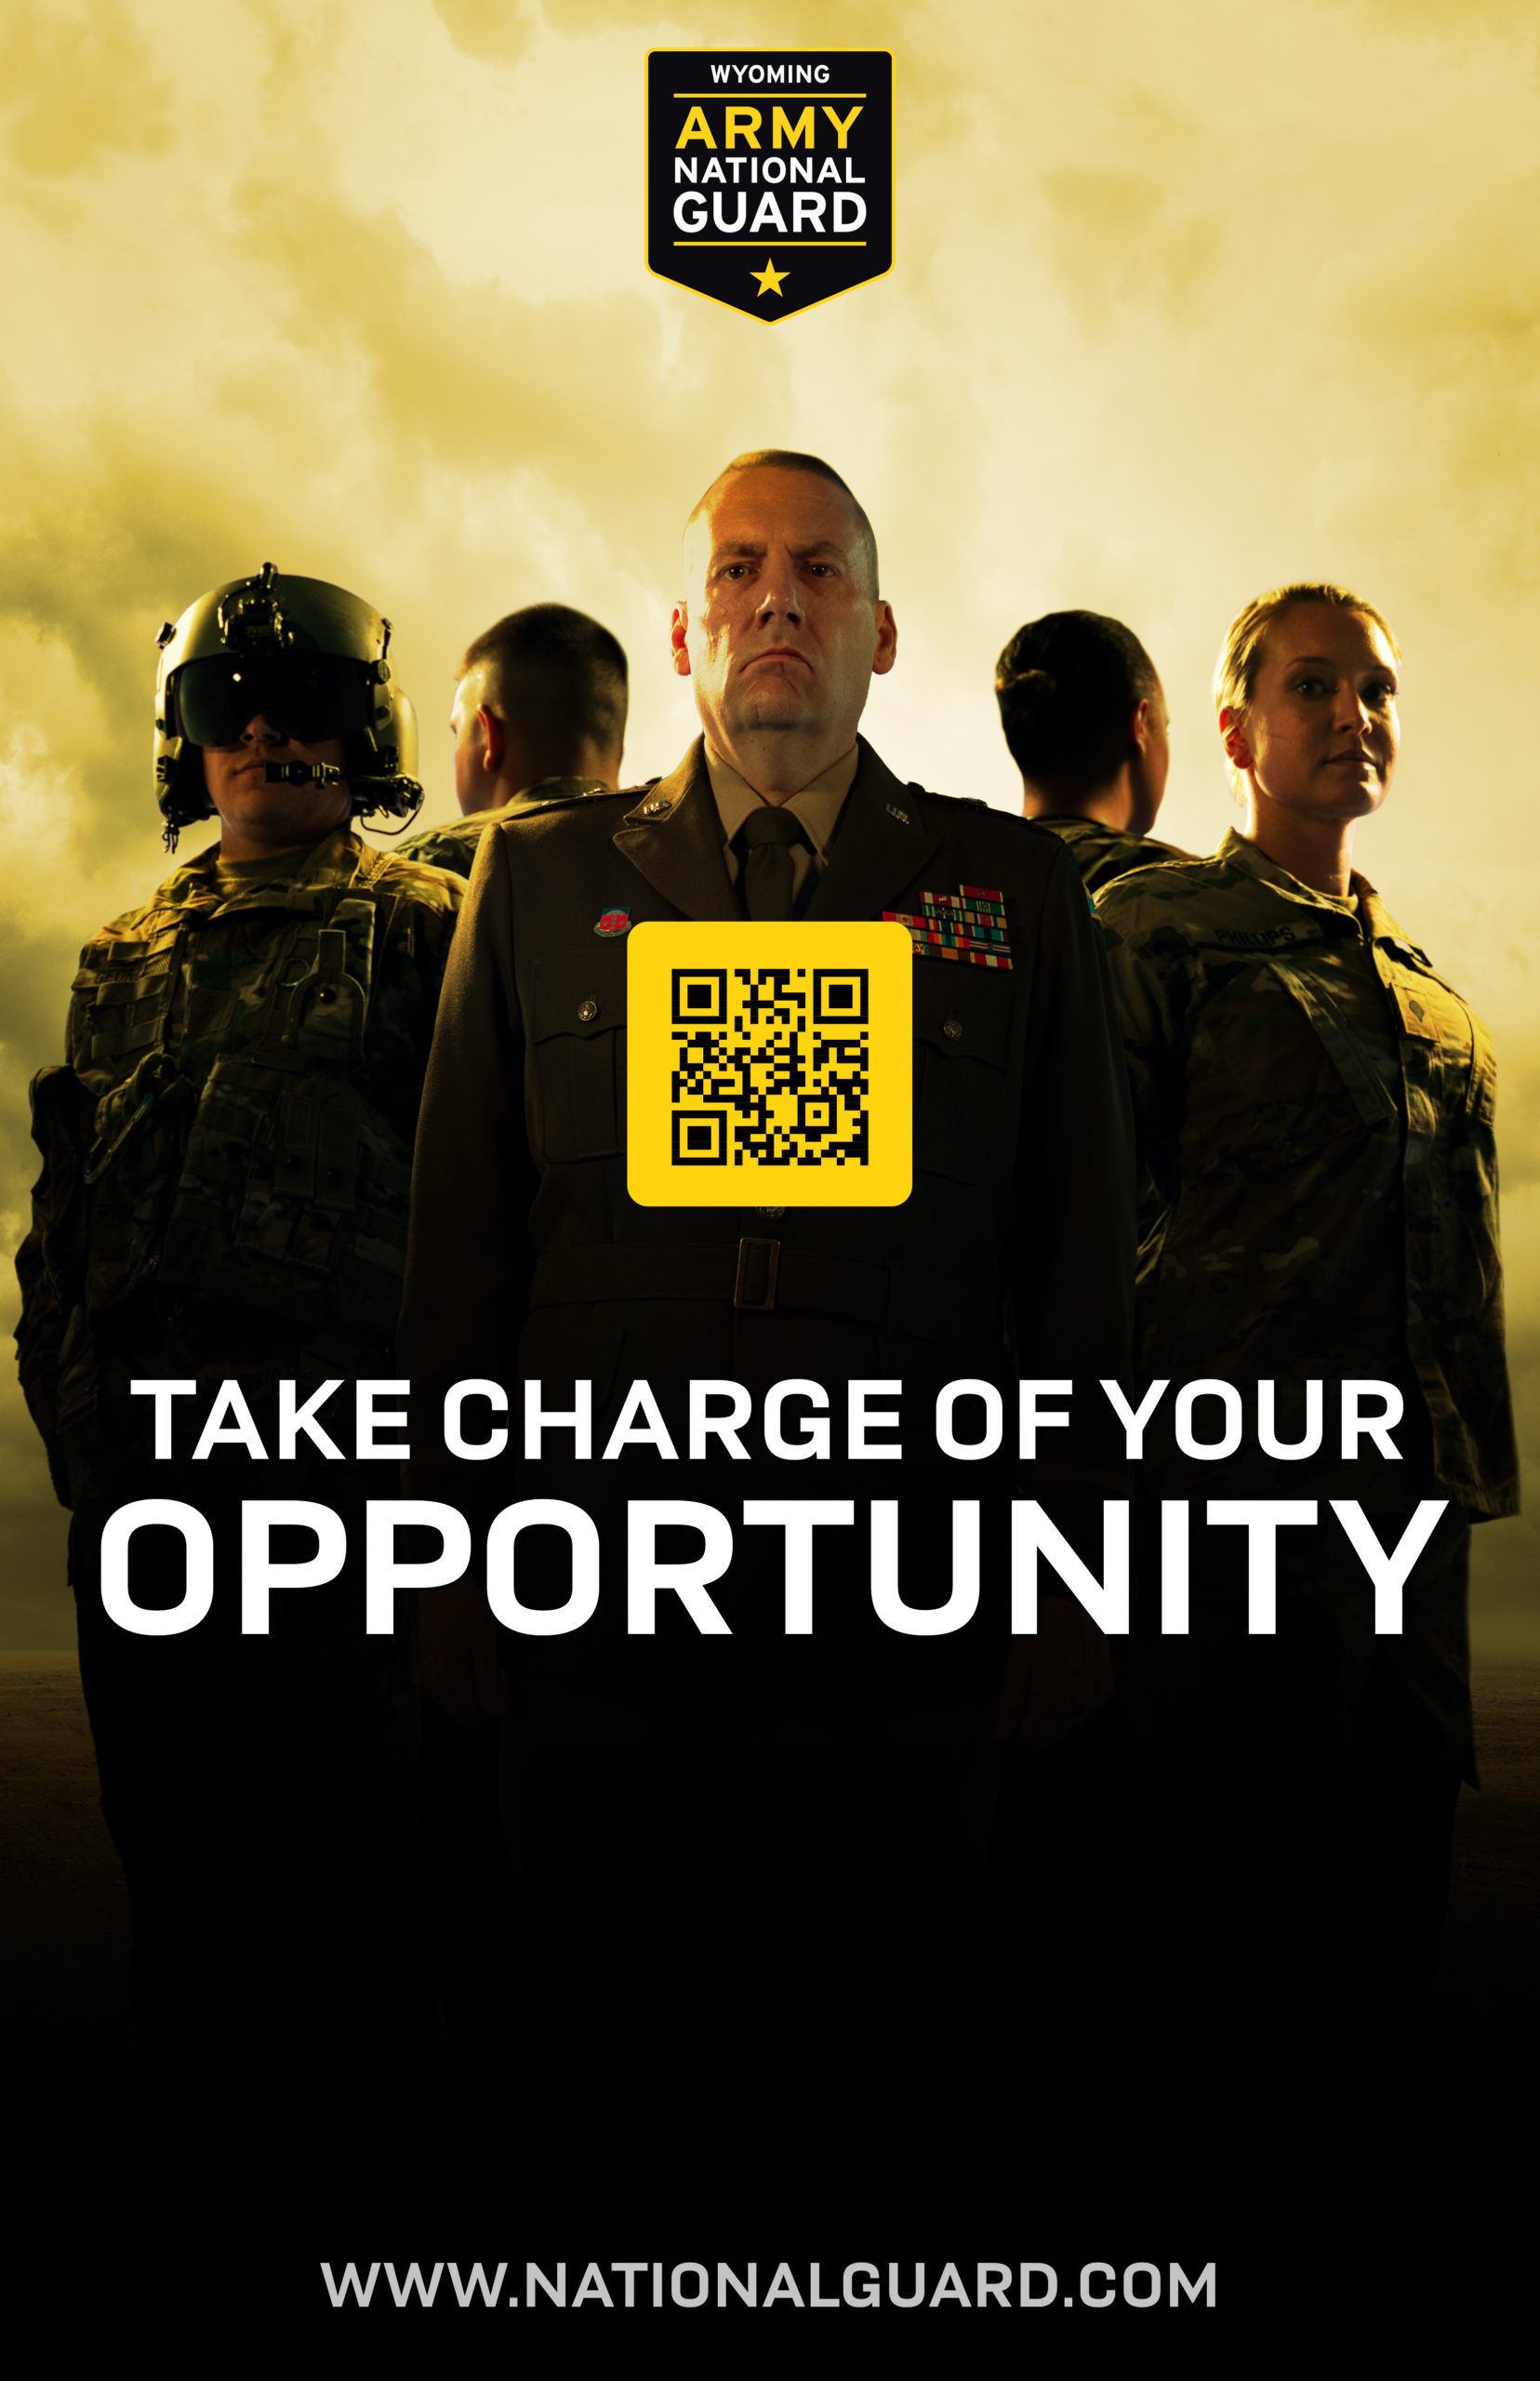 Poster with people dressed in National Guard Uniforms against a yellow background. The text reads "Take charge of your opportunity"